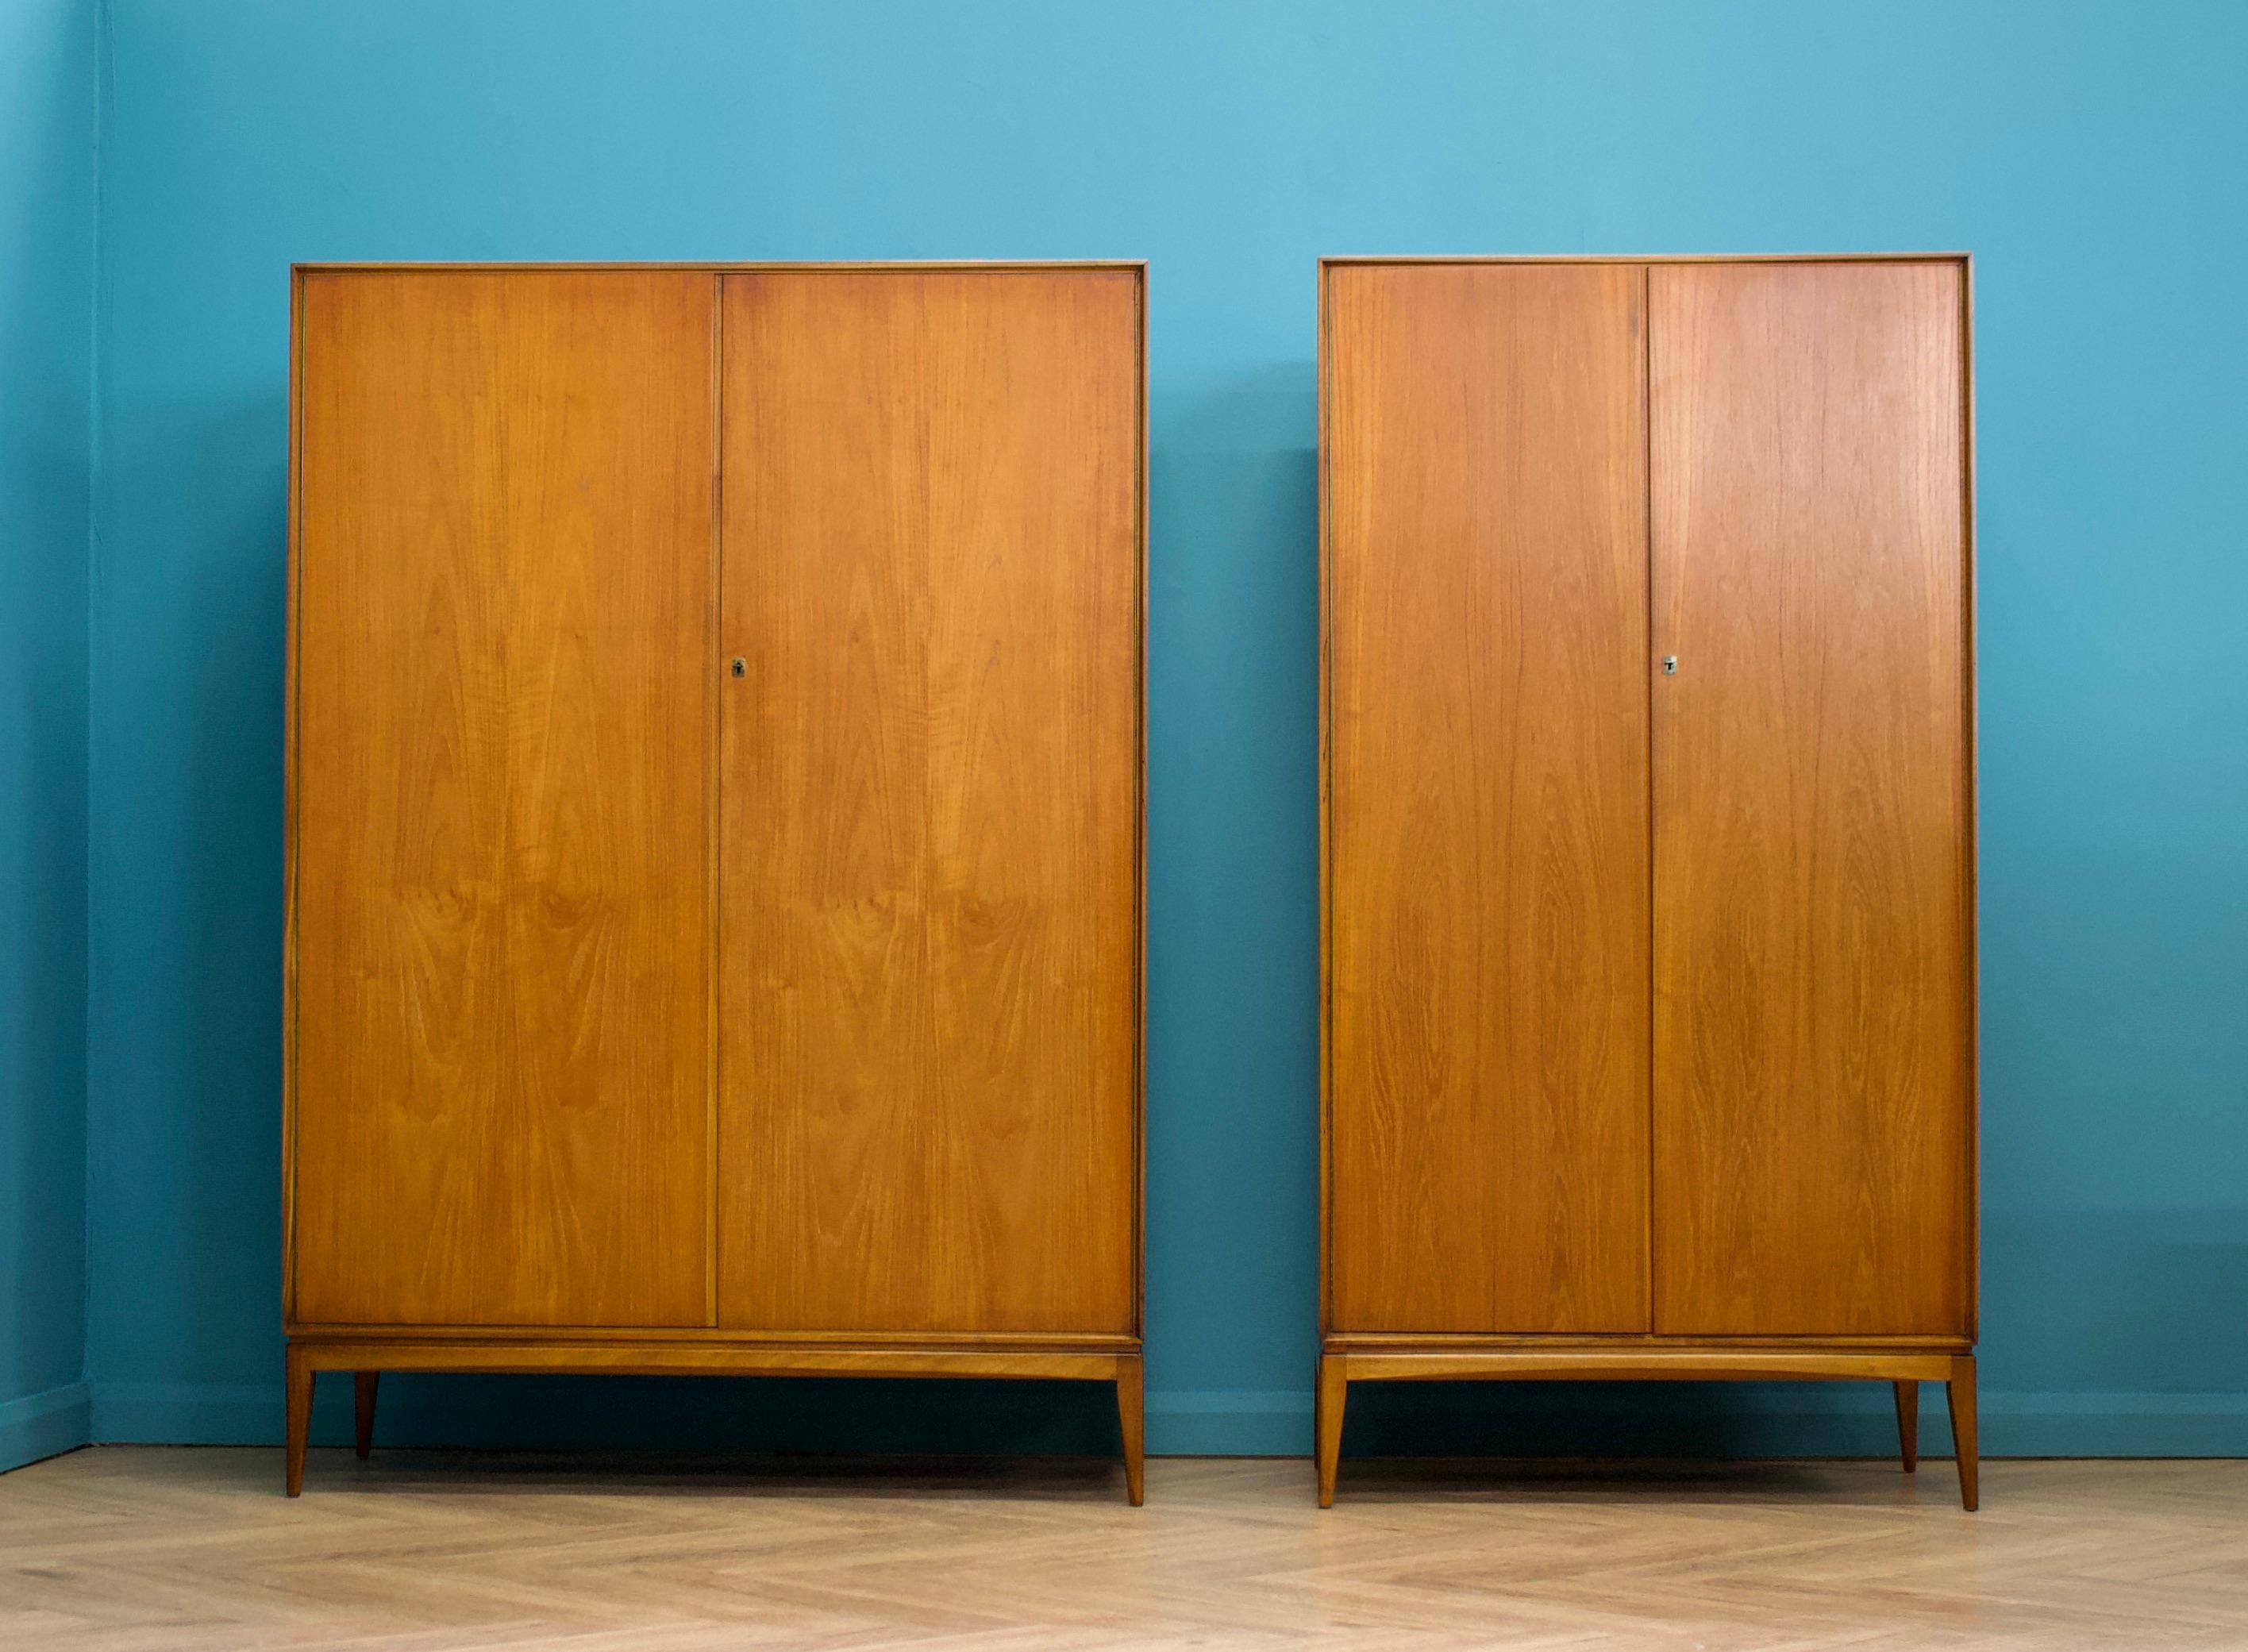 A freestanding double door teak wardrobe from McIntosh - in the Danish modern style Made during the 1960s Fitted out with two clothes rail and fixed shelving for ample storage
The style of this wardrobe is minimalist - with it's clean lines,